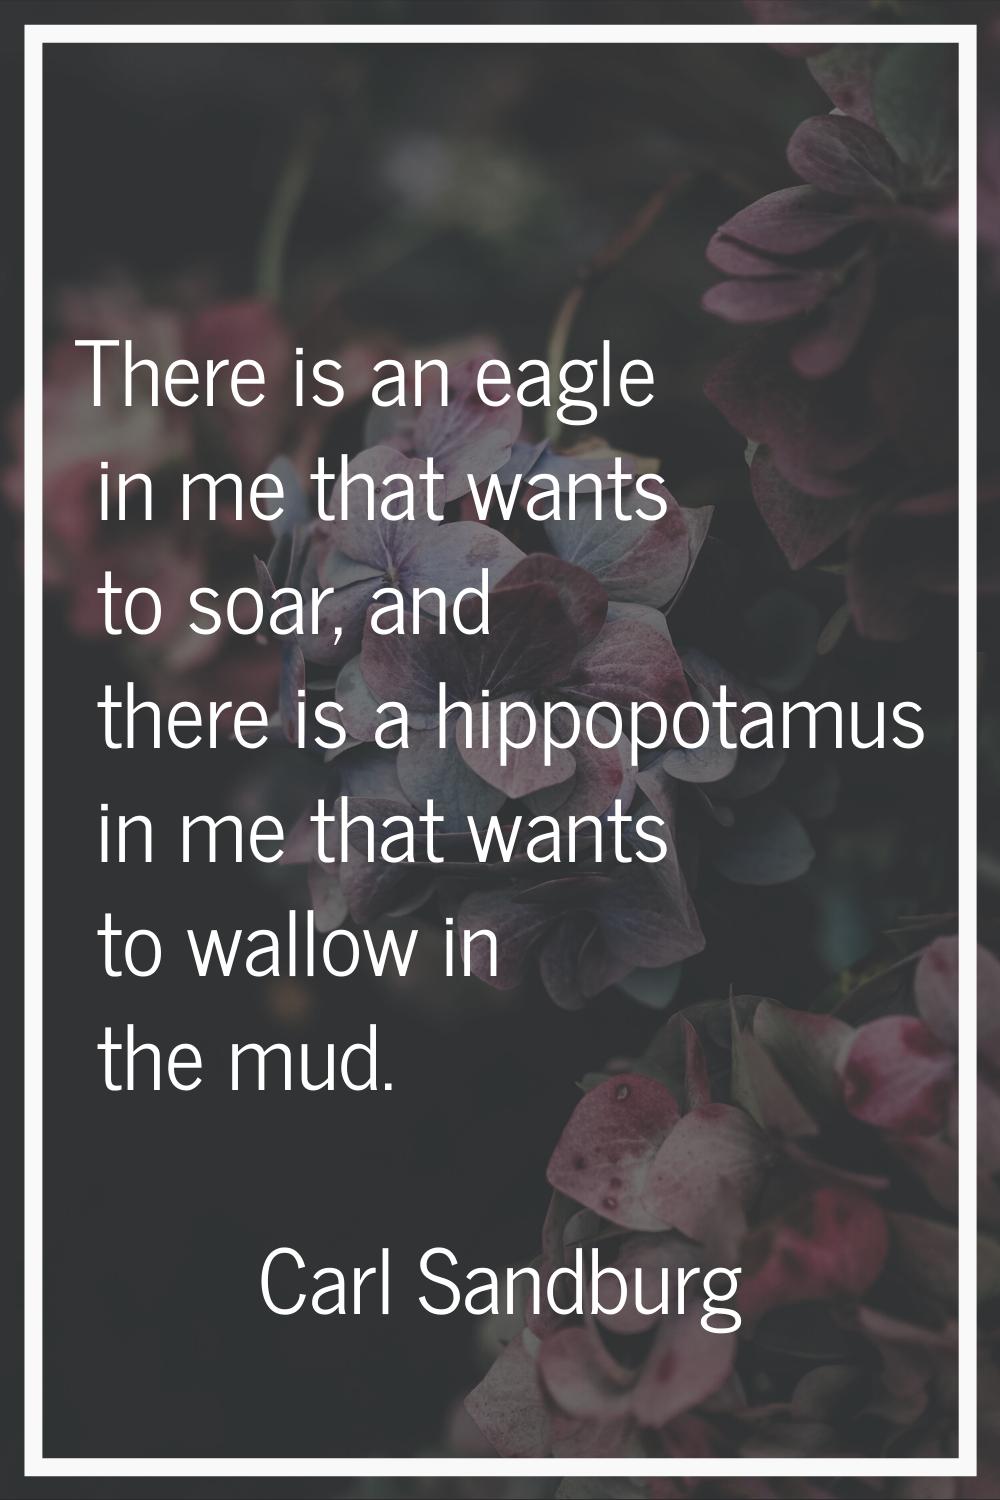 There is an eagle in me that wants to soar, and there is a hippopotamus in me that wants to wallow 